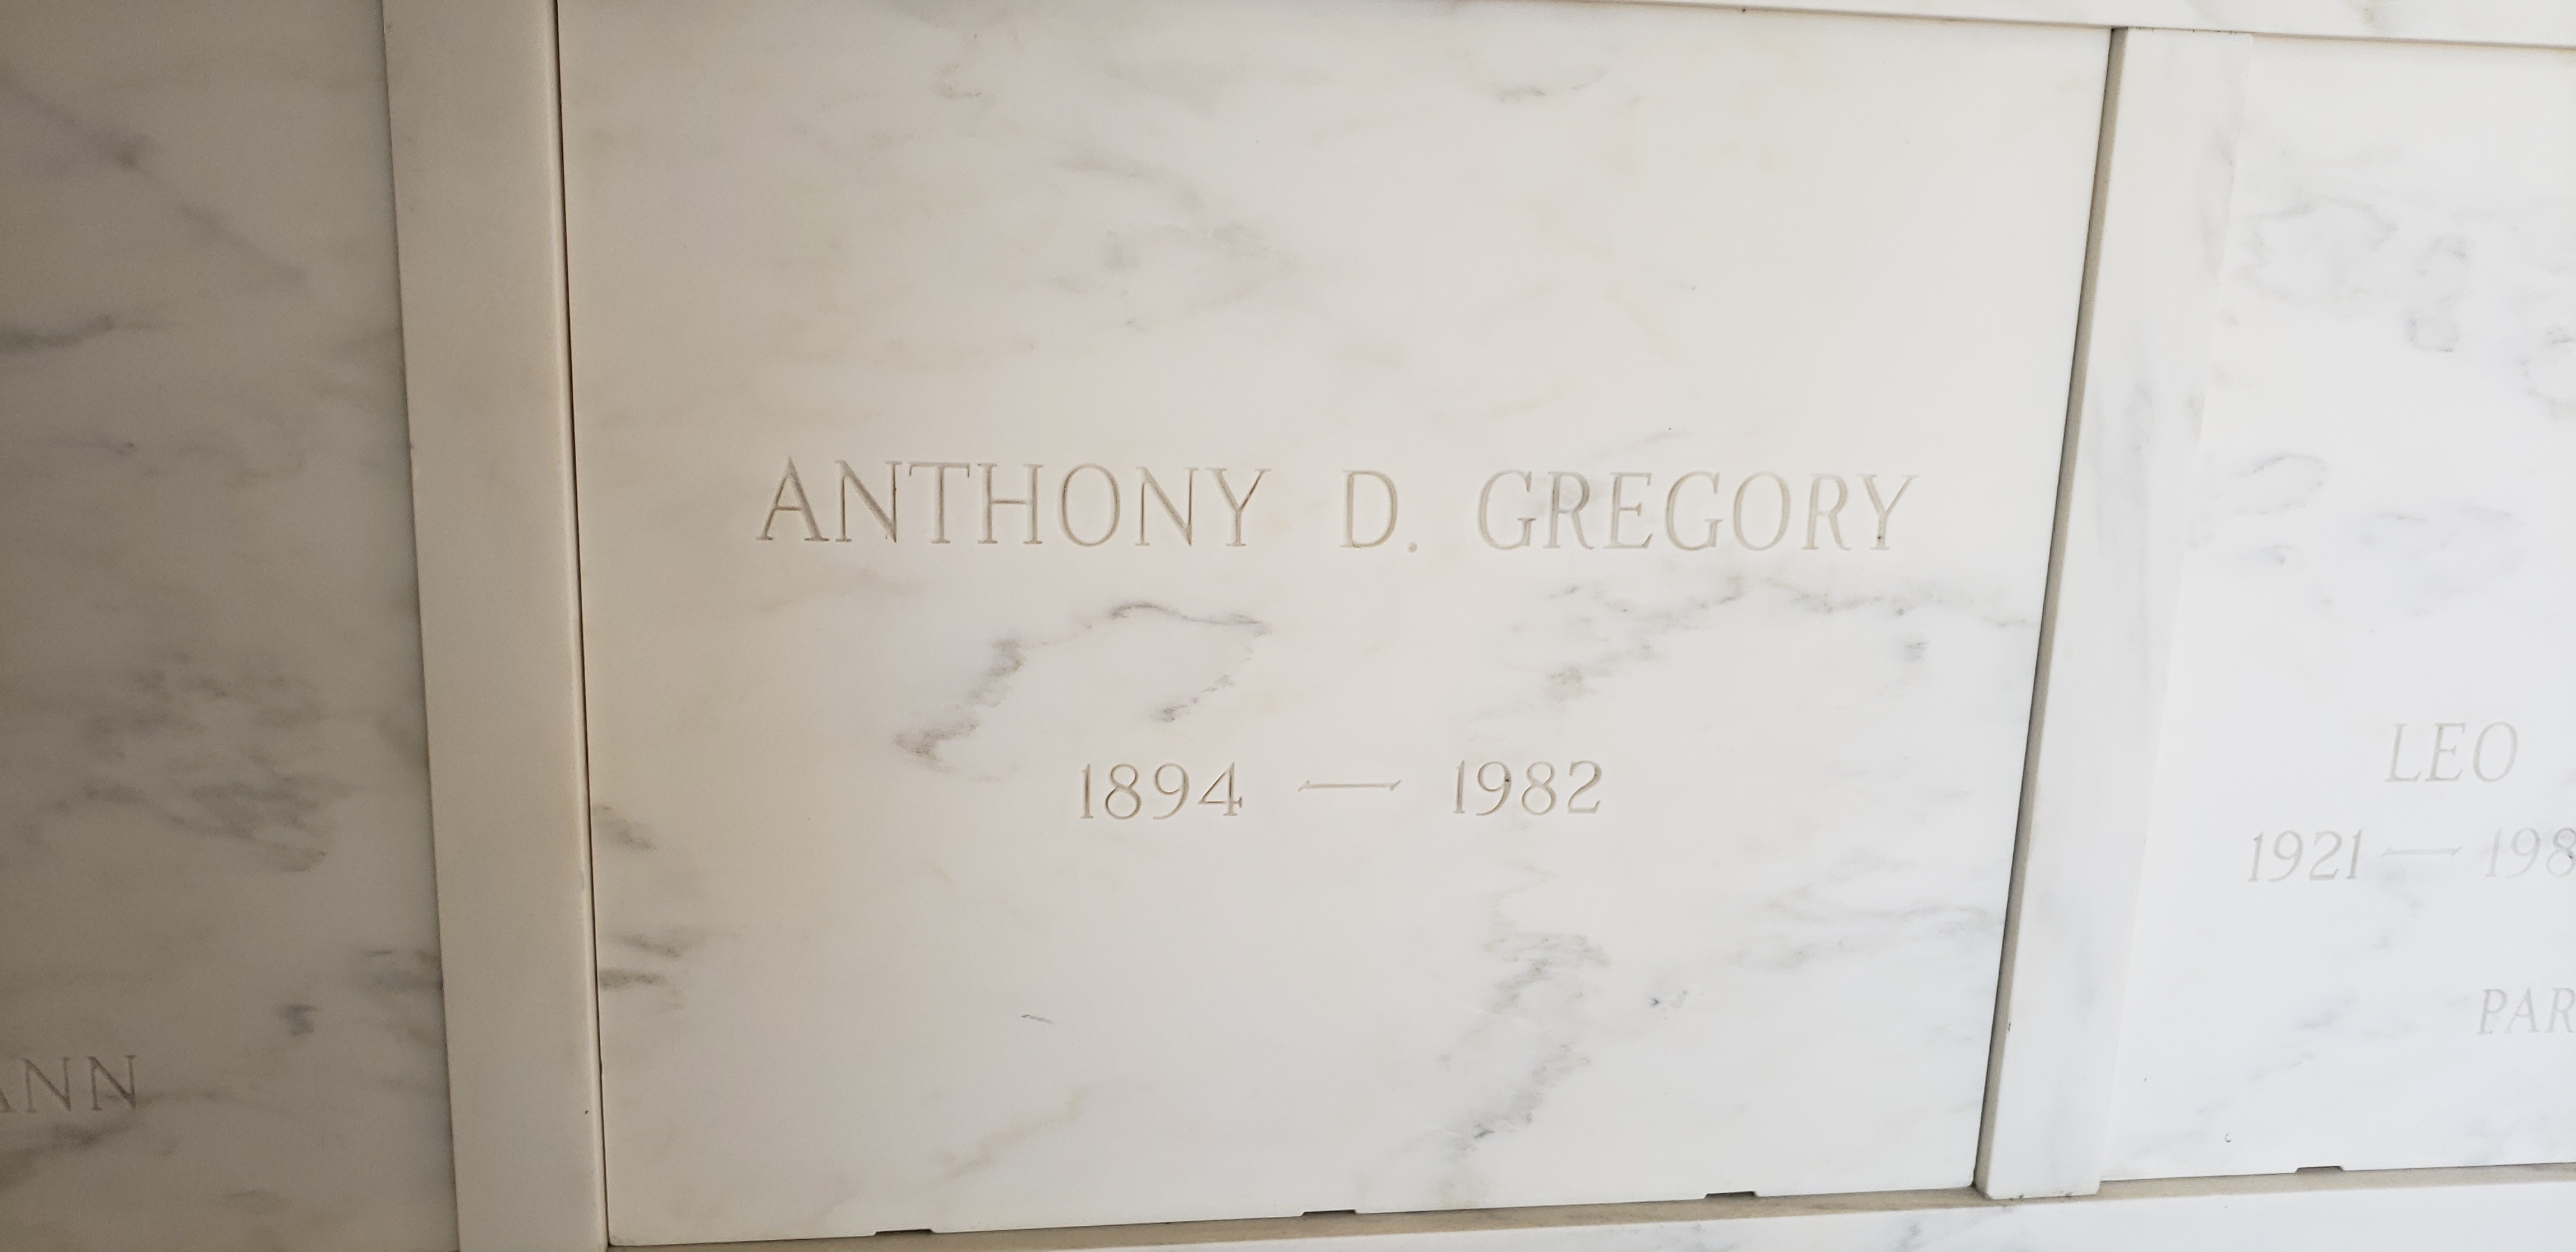 Anthony D Gregory